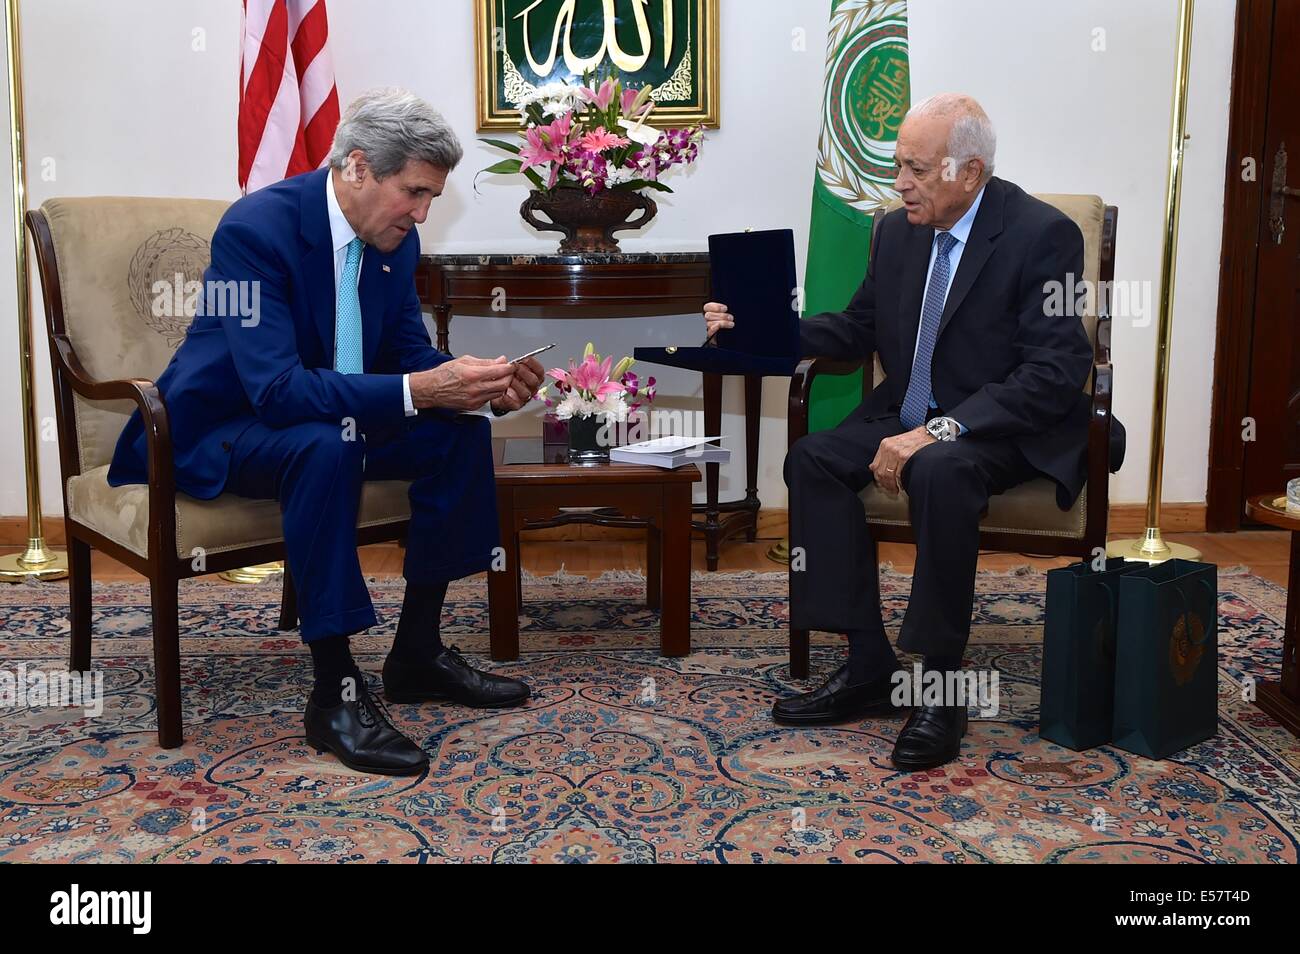 Cairo, Egypt. 22st July, 2014. US Secretary of State John Kerry examines a medallion gifted to him by Arab League Secretary-General Nabil al-Araby during discussion on a possible ceasefire between Israeli and Hamas forces fighting in the Gaza Strip at Arab League Headquarters July 22, 2014 in Cairo, Egypt. Credit:  Planetpix/Alamy Live News Stock Photo